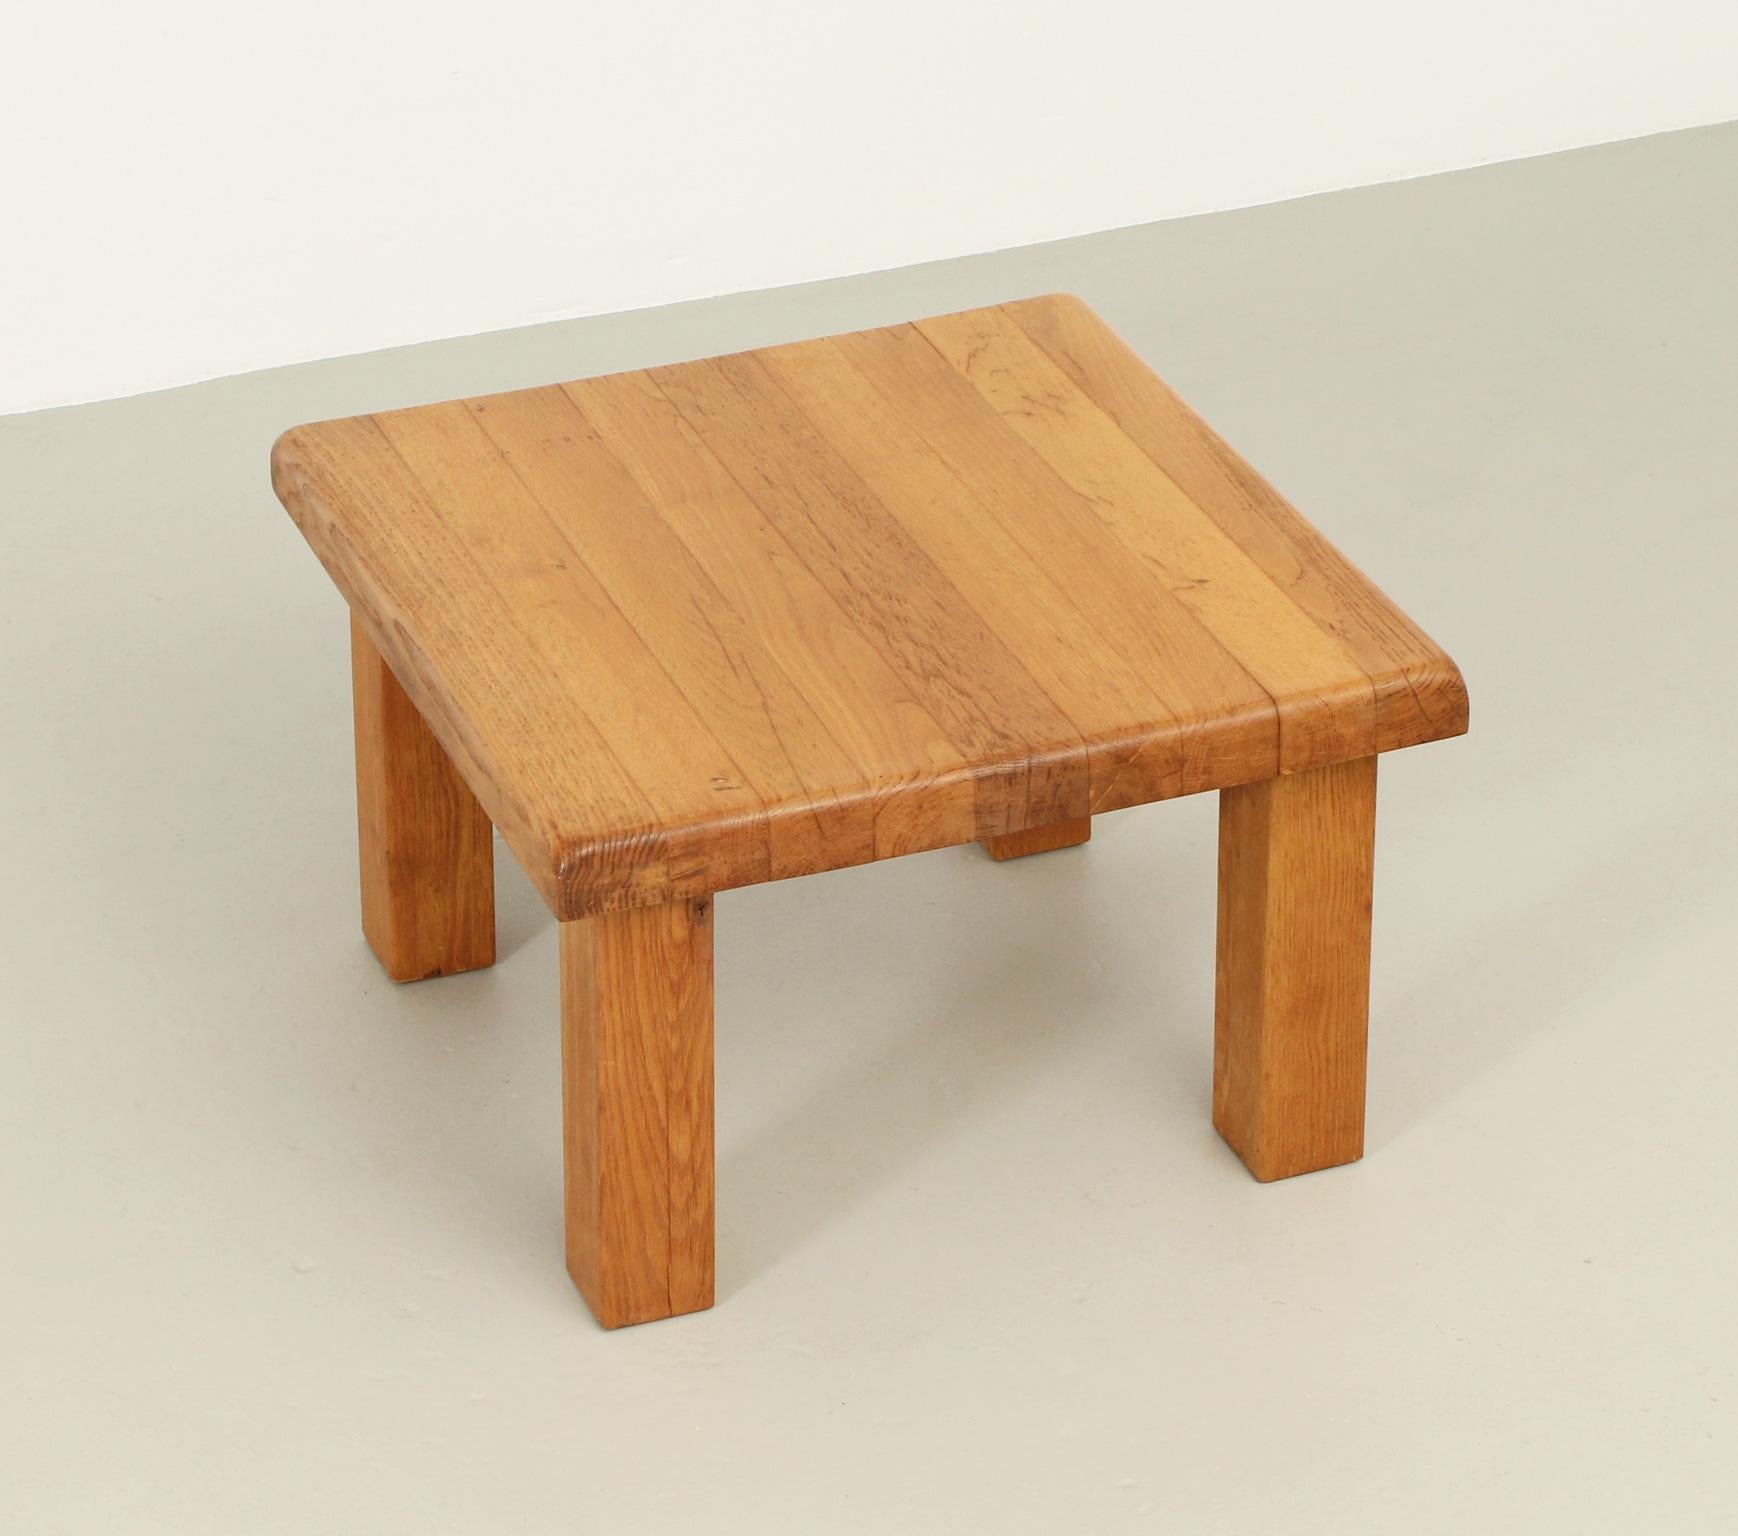 Square coffee or side table in solid oak wood, France, 1960's. Solid construction with four legs.